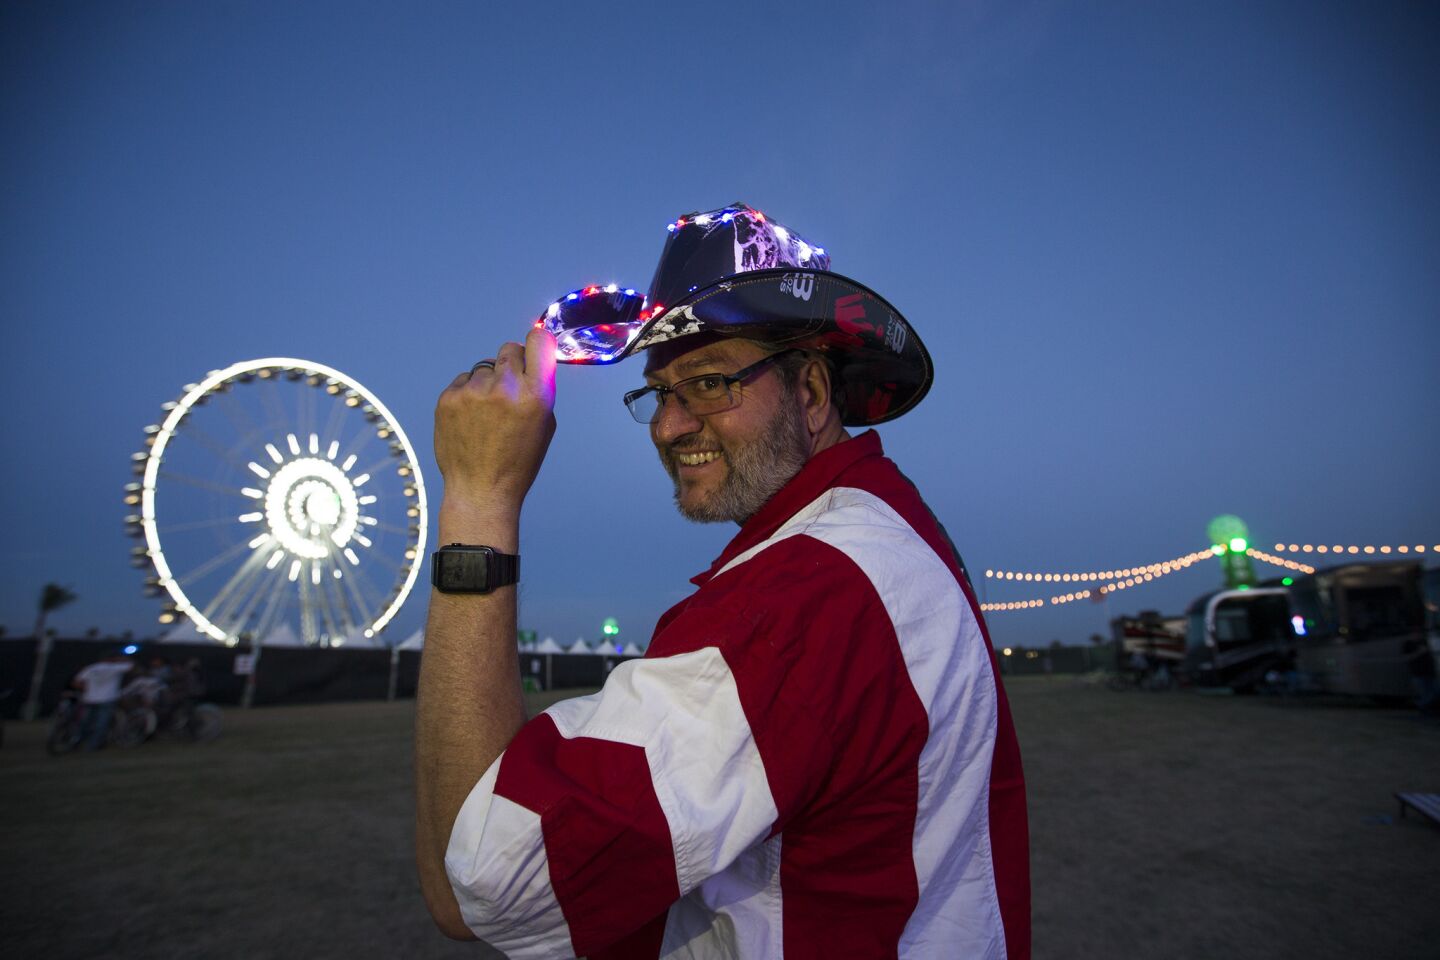 Country music fan Vito Pace, of Calabasas, sports LED lights on his hat at dusk in the RV Resort for the 10th anniversary of the Stagecoach Country Music Festival.